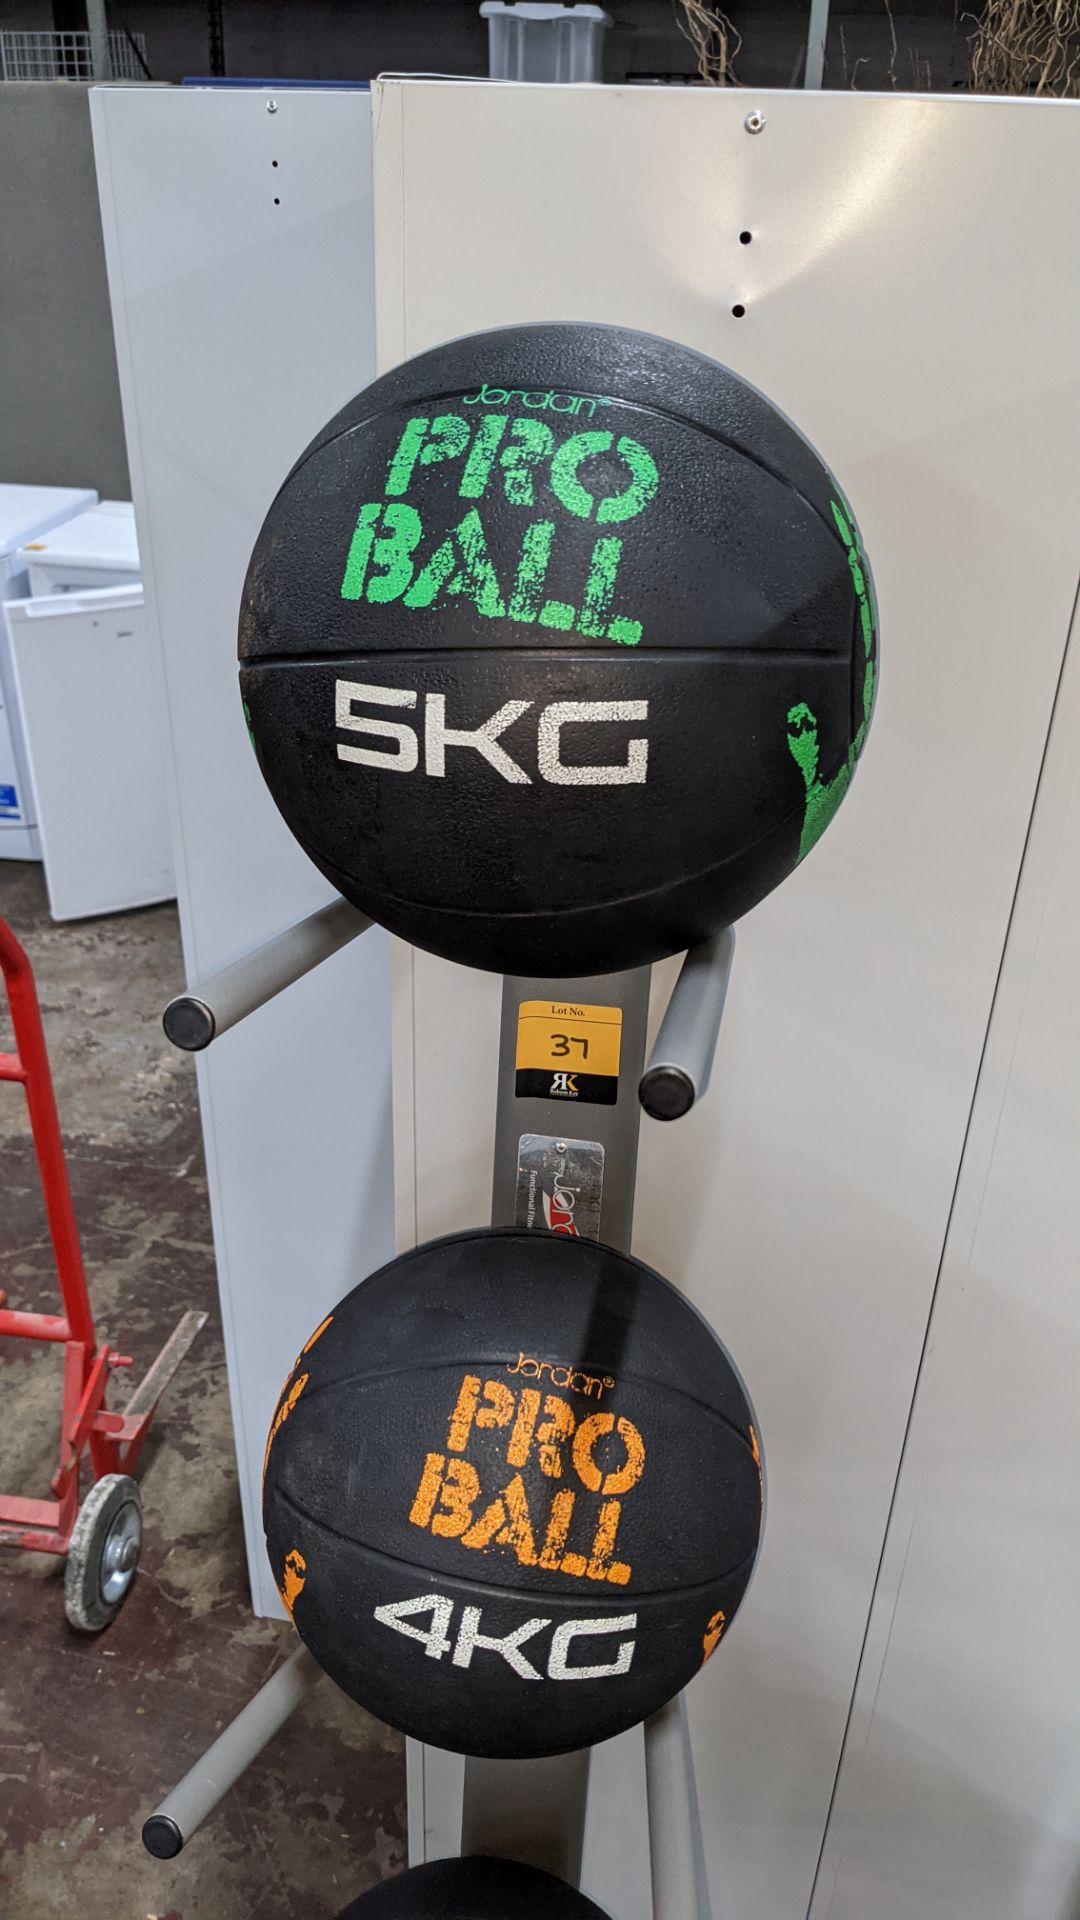 Jordan Fitness weighted ball rack capable of holding 5 balls plus 4 off Jordan Pro Balls in sizes 1, - Image 4 of 7